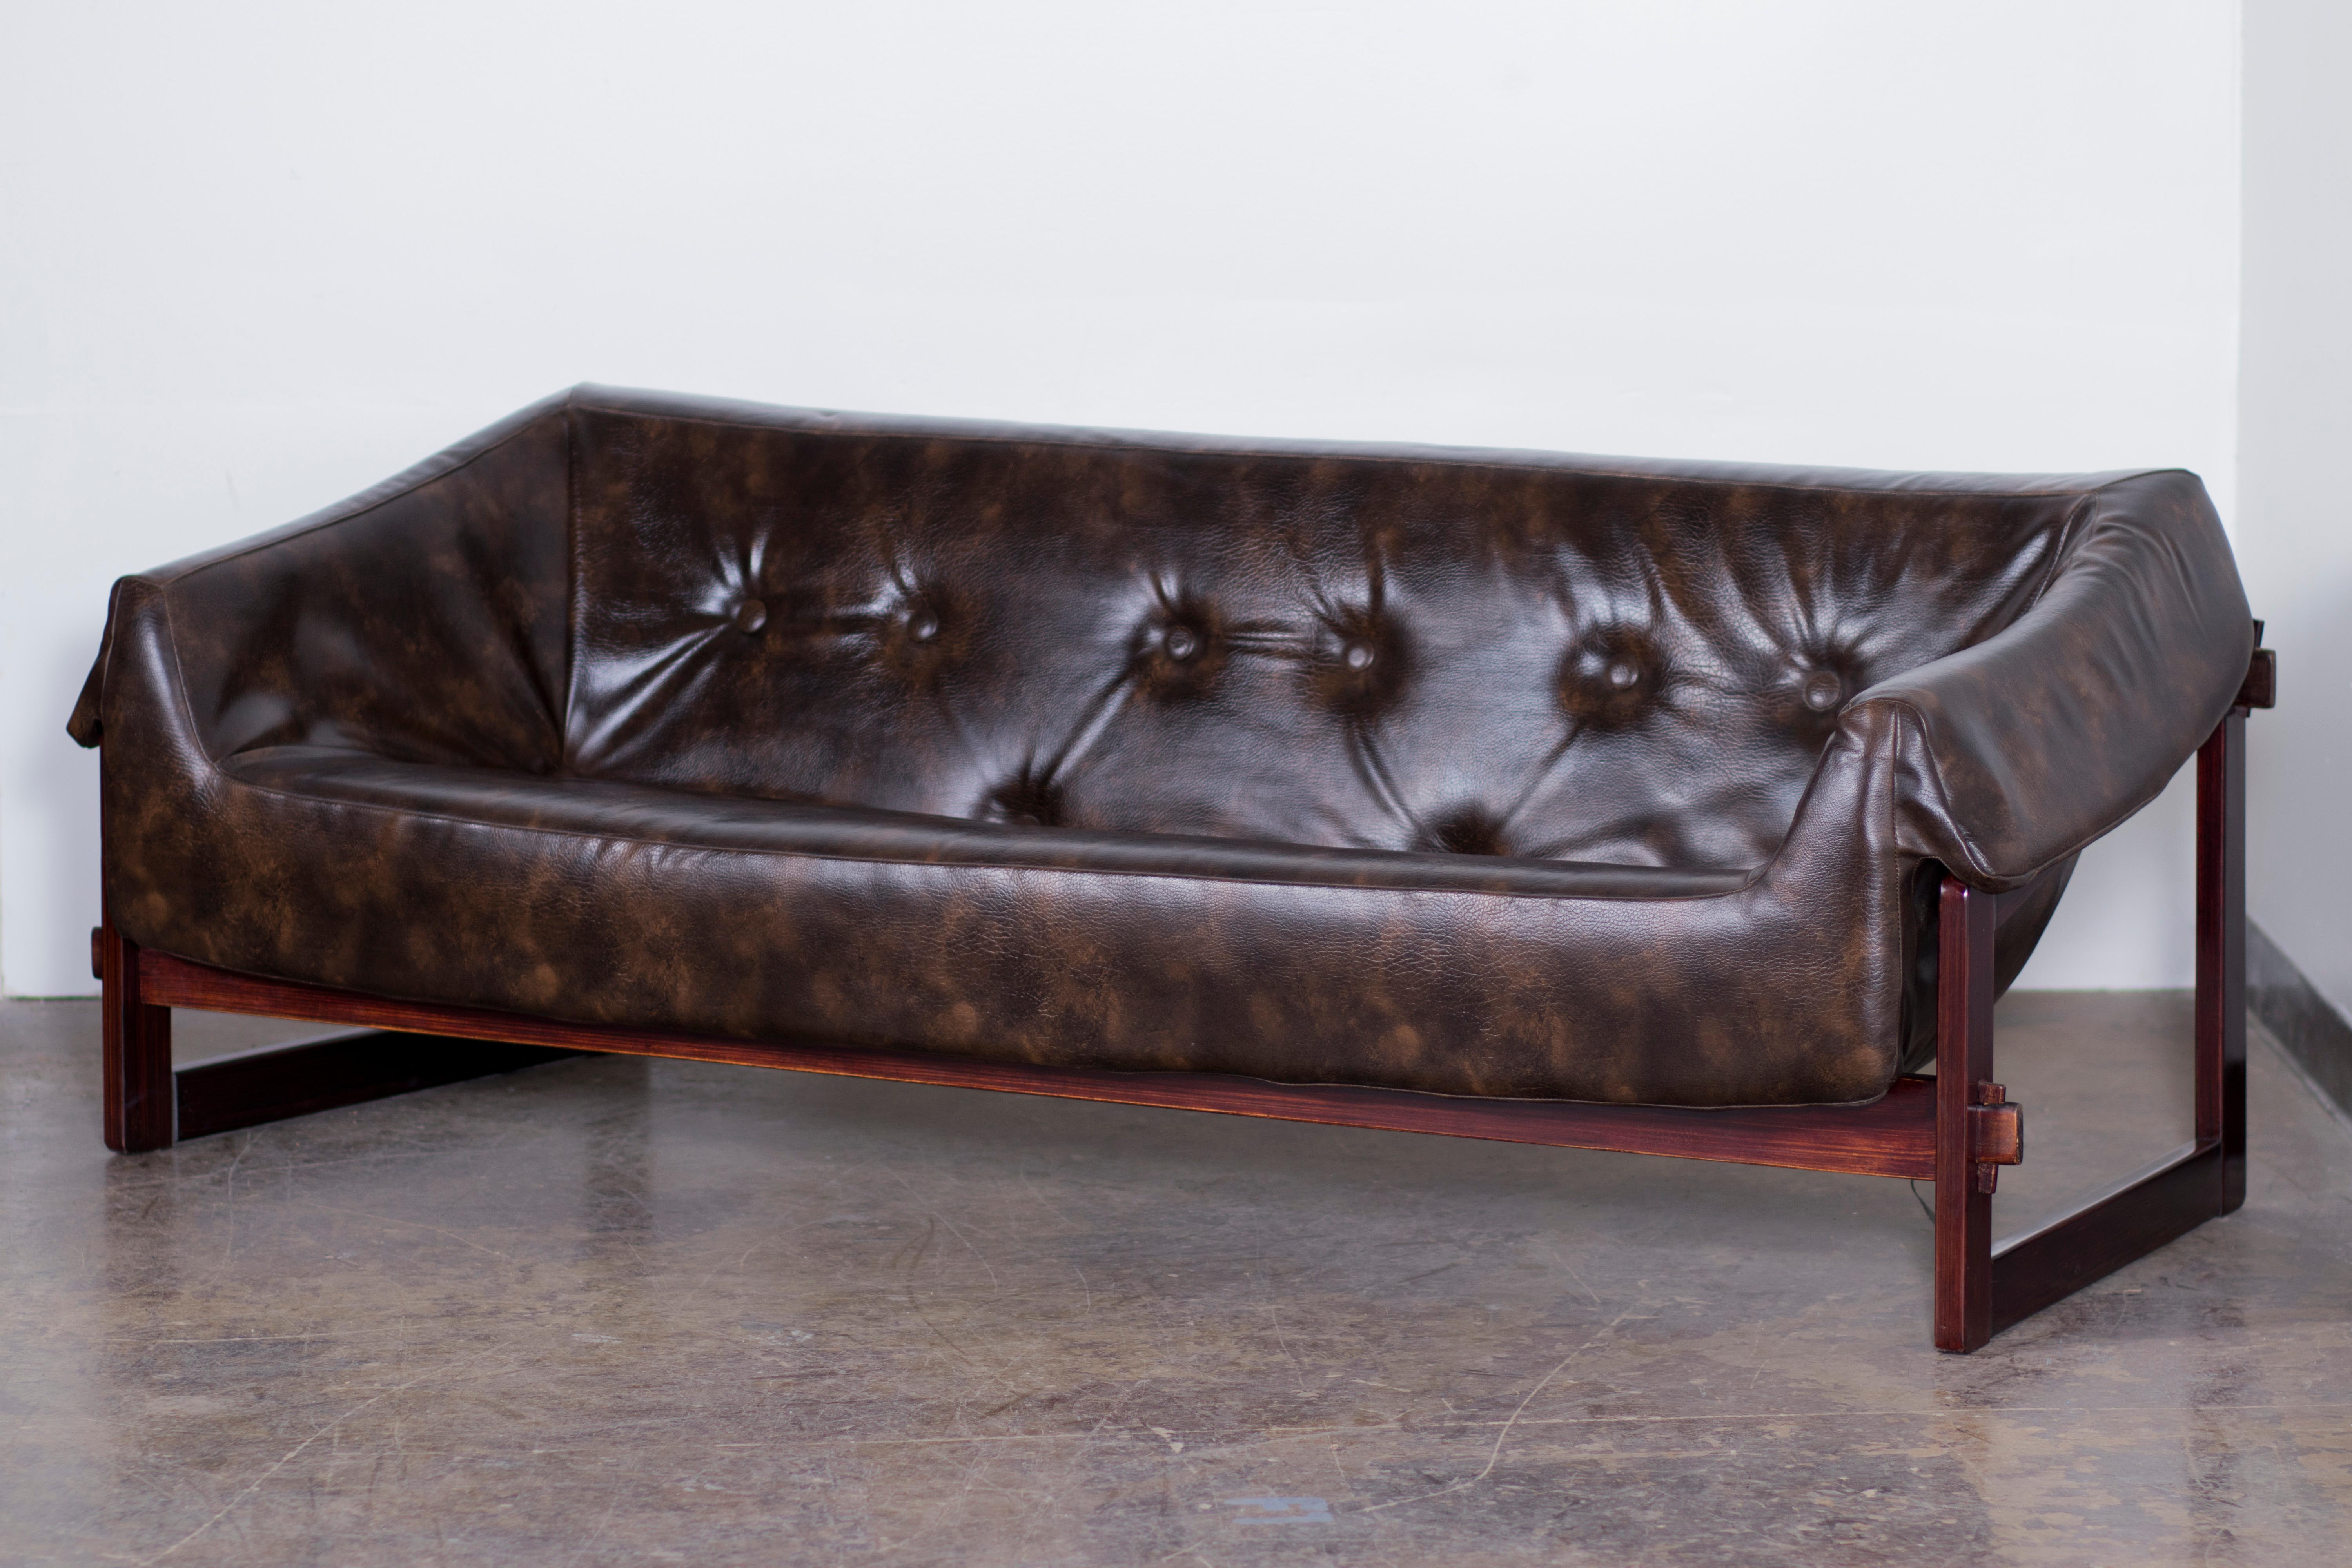 Mid-Century Modern sofa by Percival Lafer in Brazilian Cherry and original rare vintage leather. Really unique design and construction make this a true statement piece.